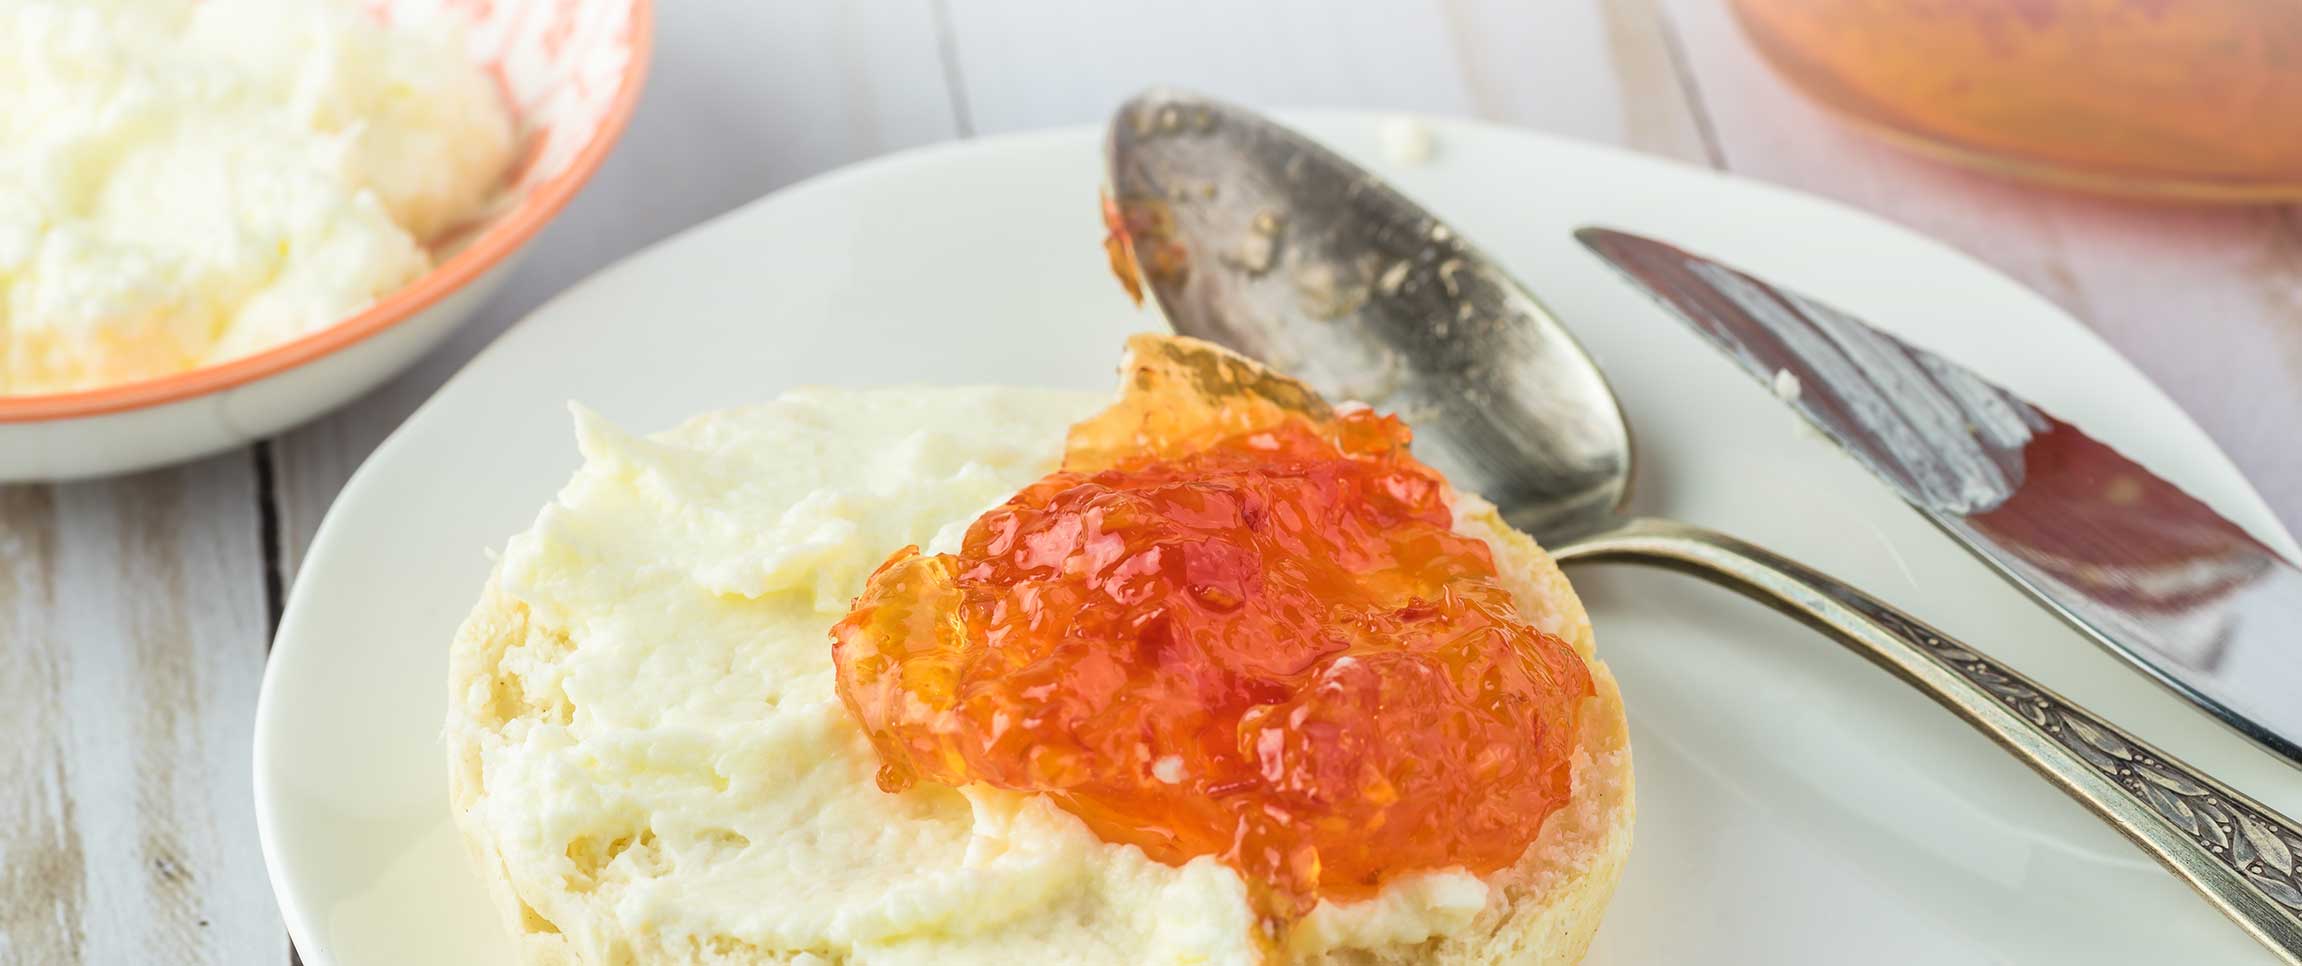 Habanero Pepper Jelly on an English Muffin